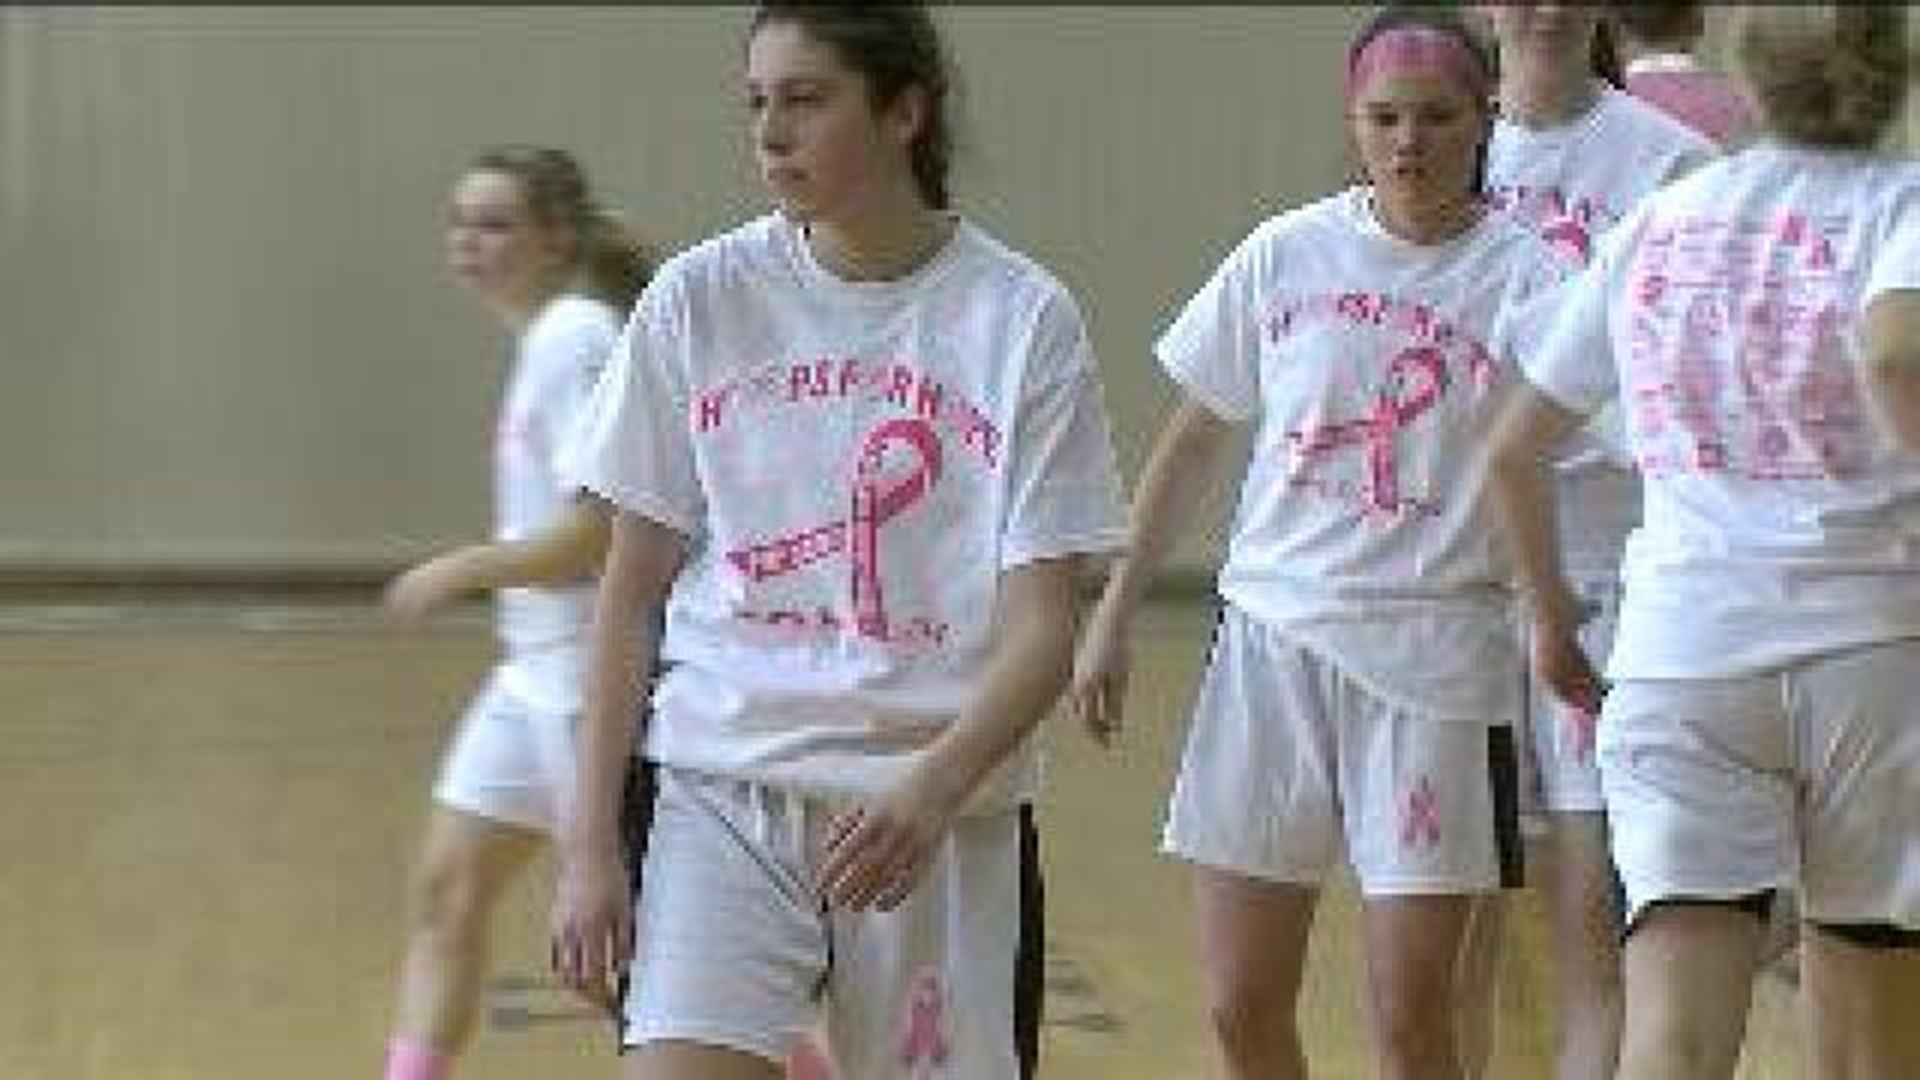 Teams Face Off in ‘Pink Night’ Basketball Game